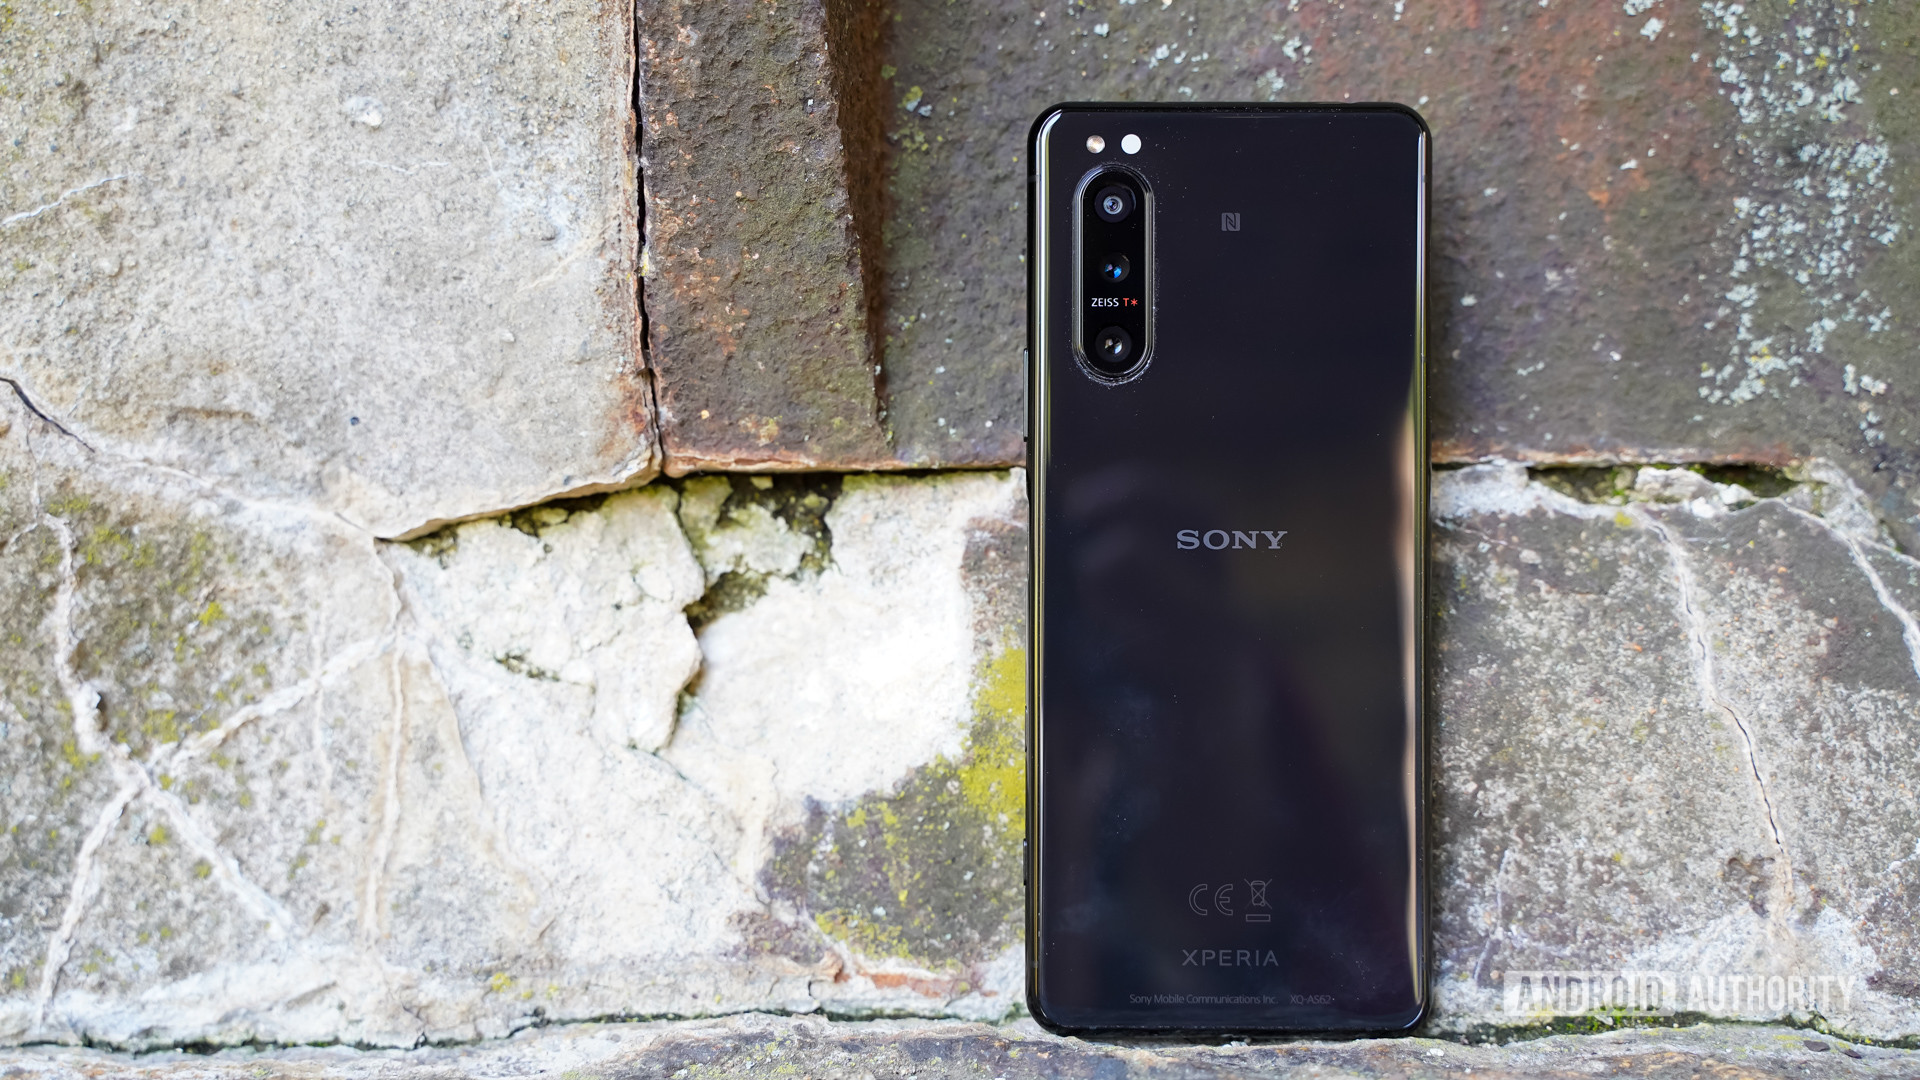 Sony Xperia 5 II review: The best Sony phone in years - CNET